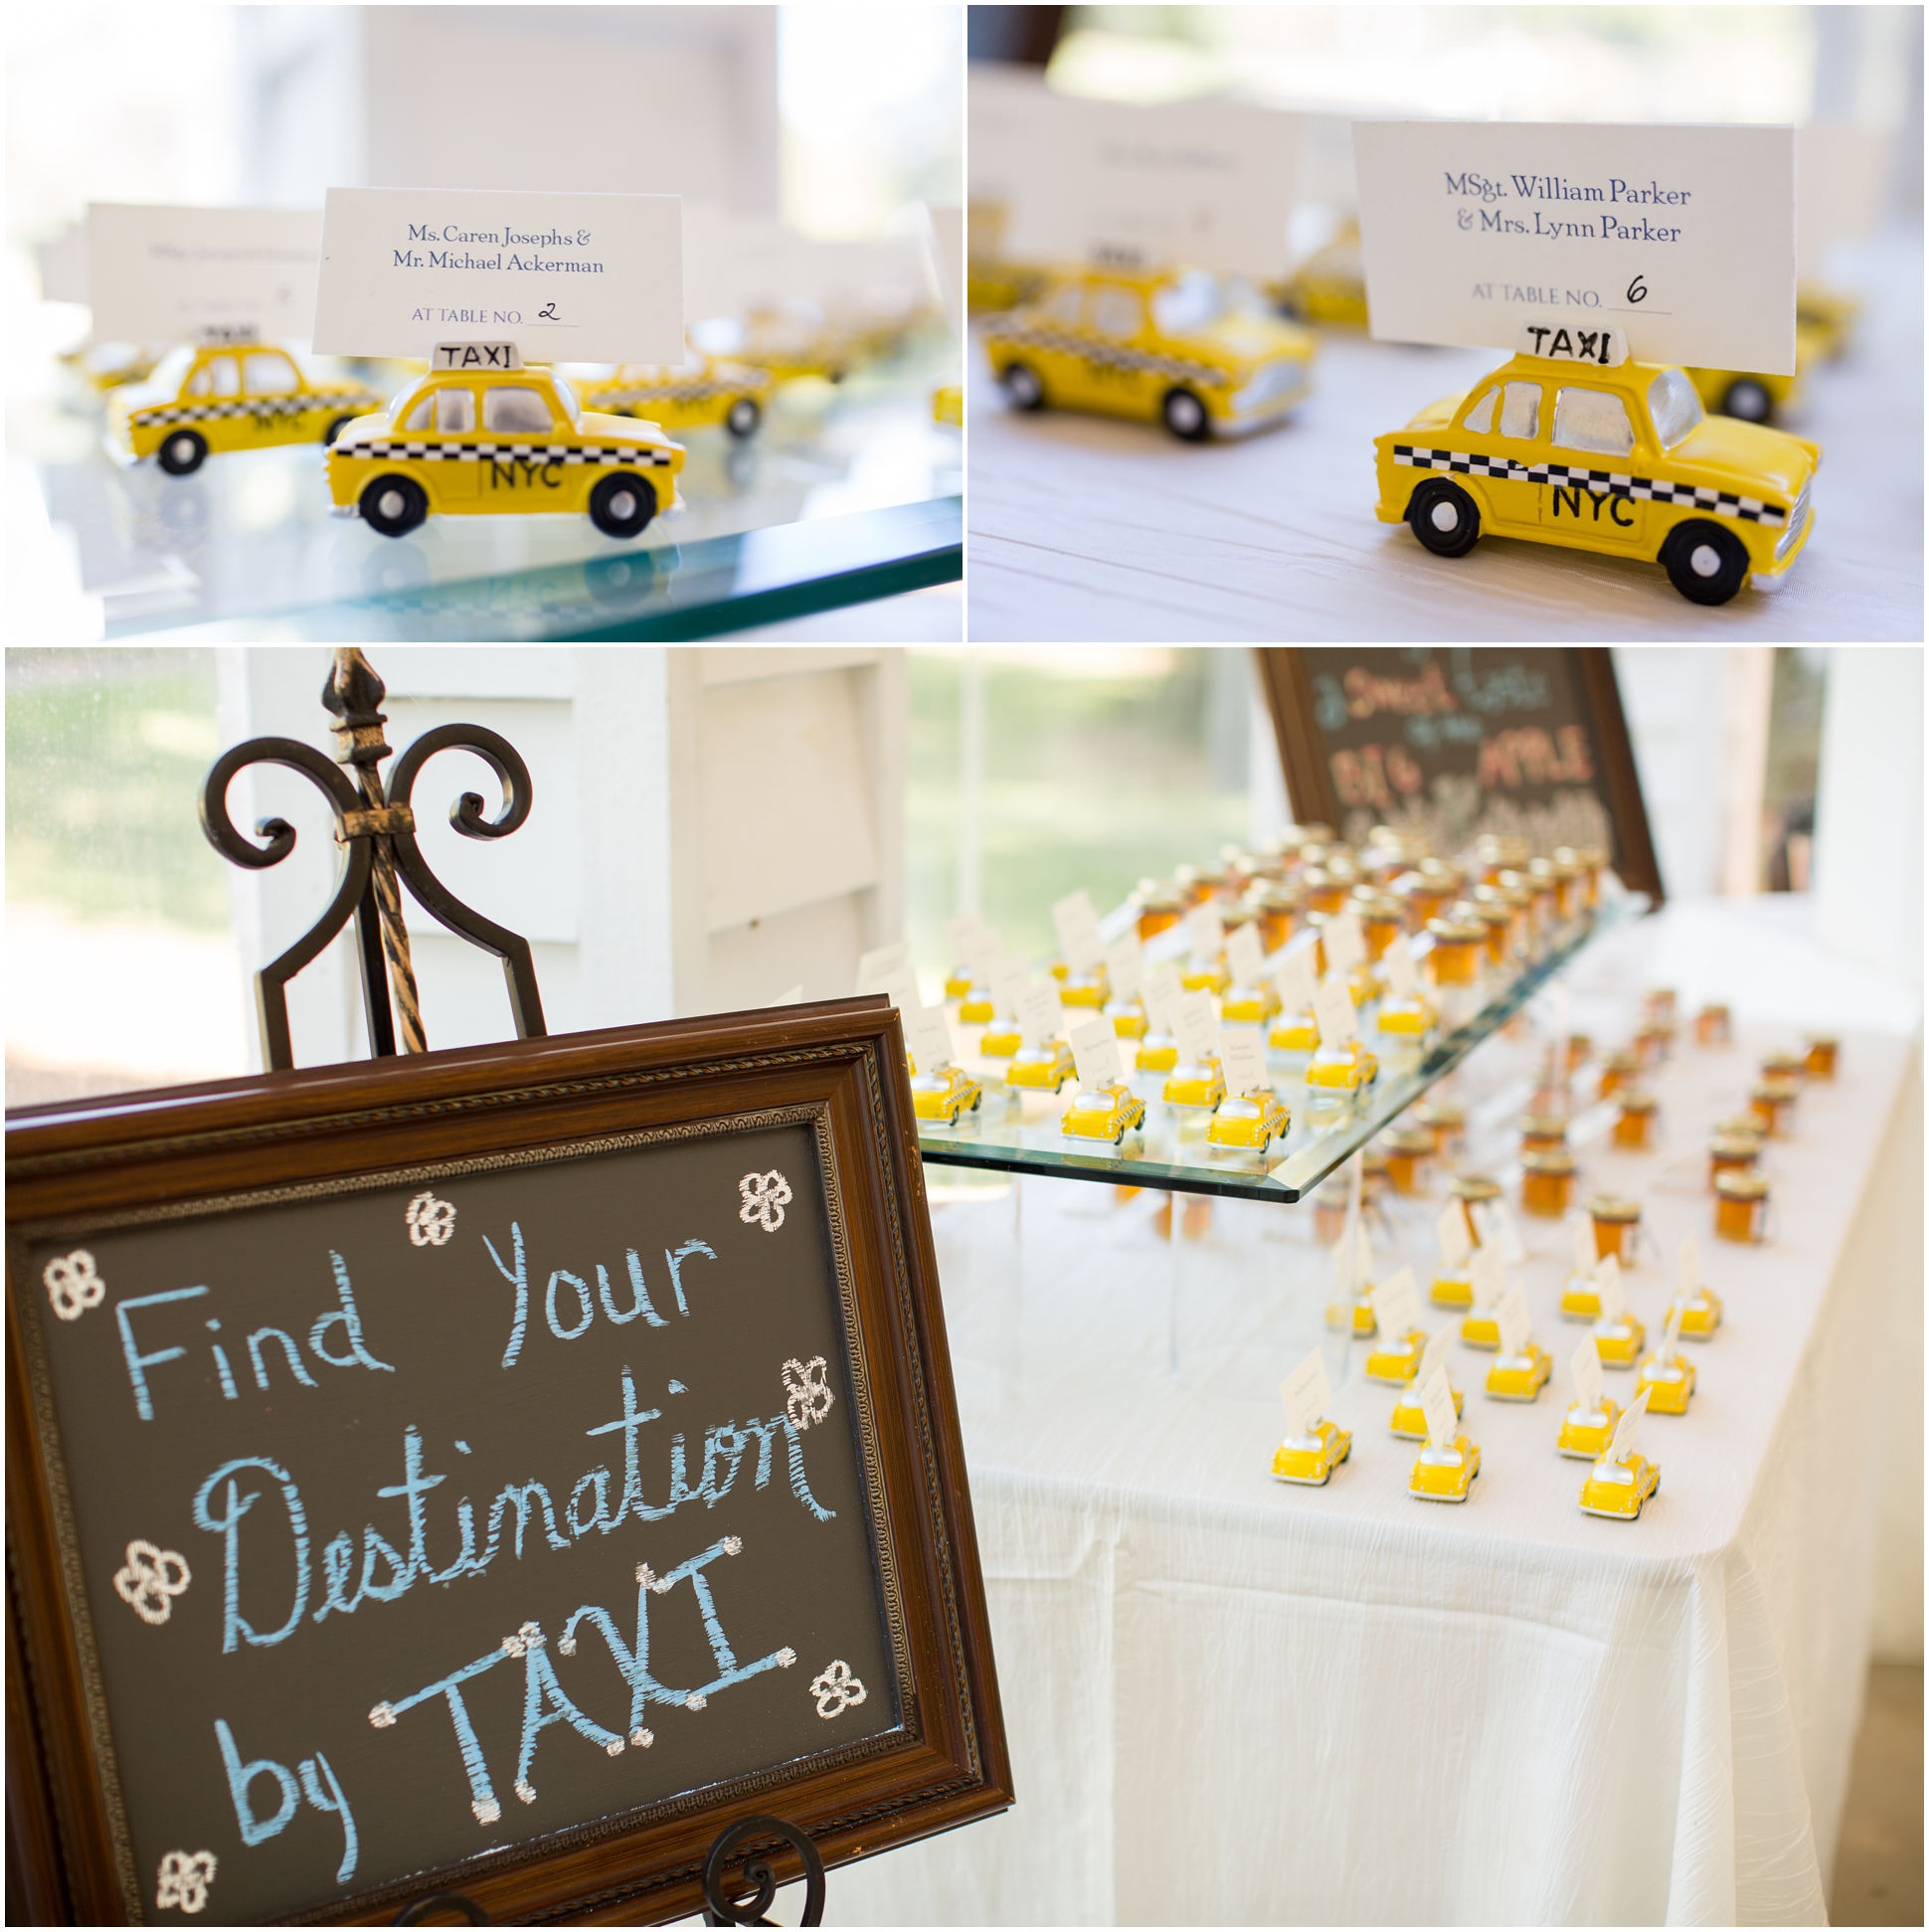 Two Chics Photography | 8 Tips for Personalizing your Wedding | www.twochicsphotography.com